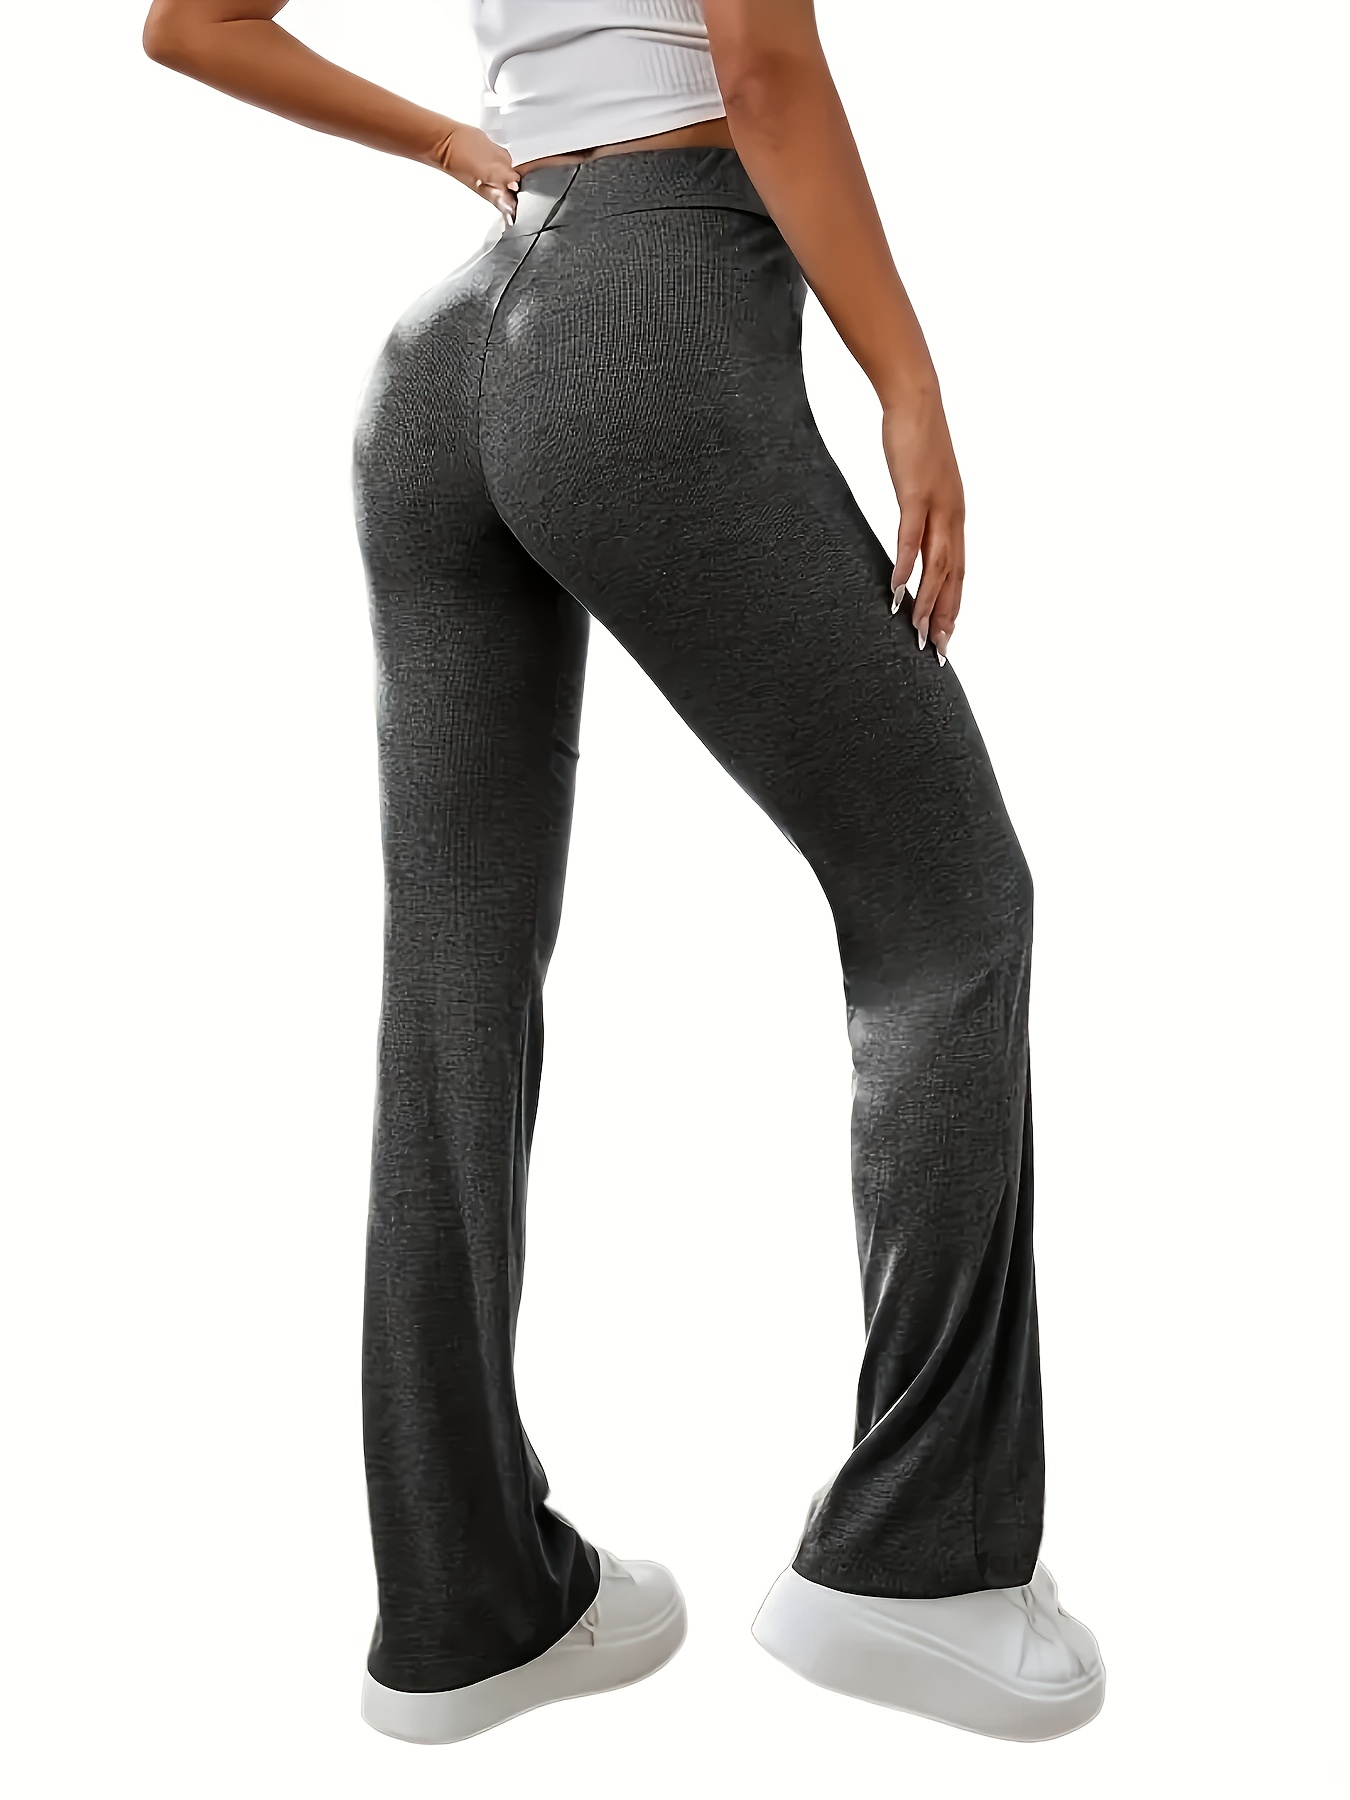 Flare Comfort women's pants for yoga and sports in micromodal